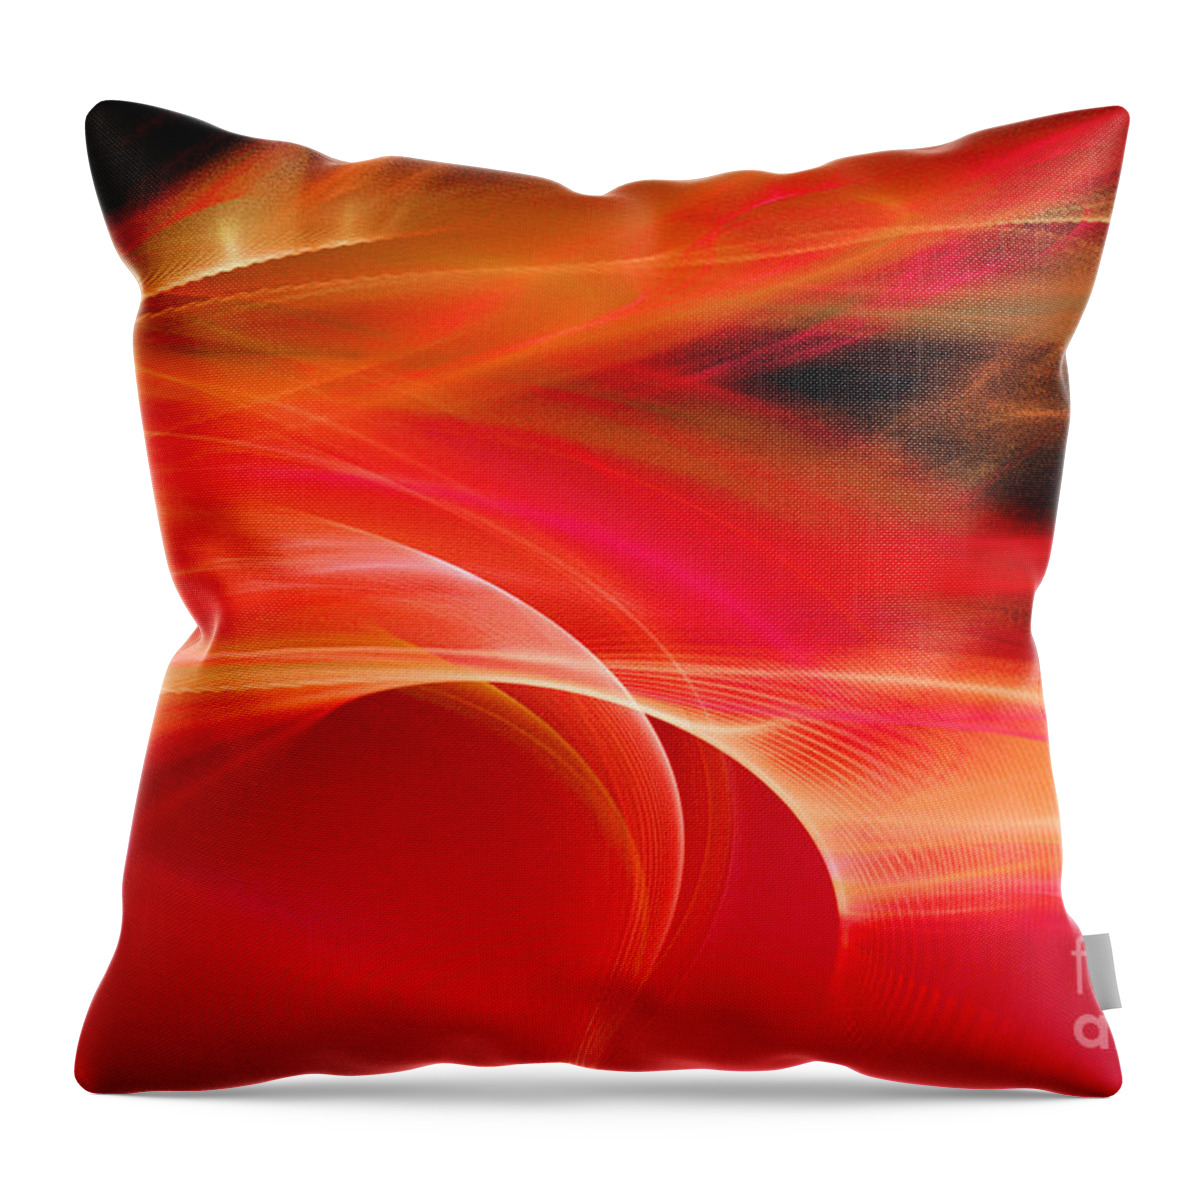 Winds Of Rage And Torment Throw Pillow featuring the digital art Winds of Rage and Torment by Elizabeth McTaggart